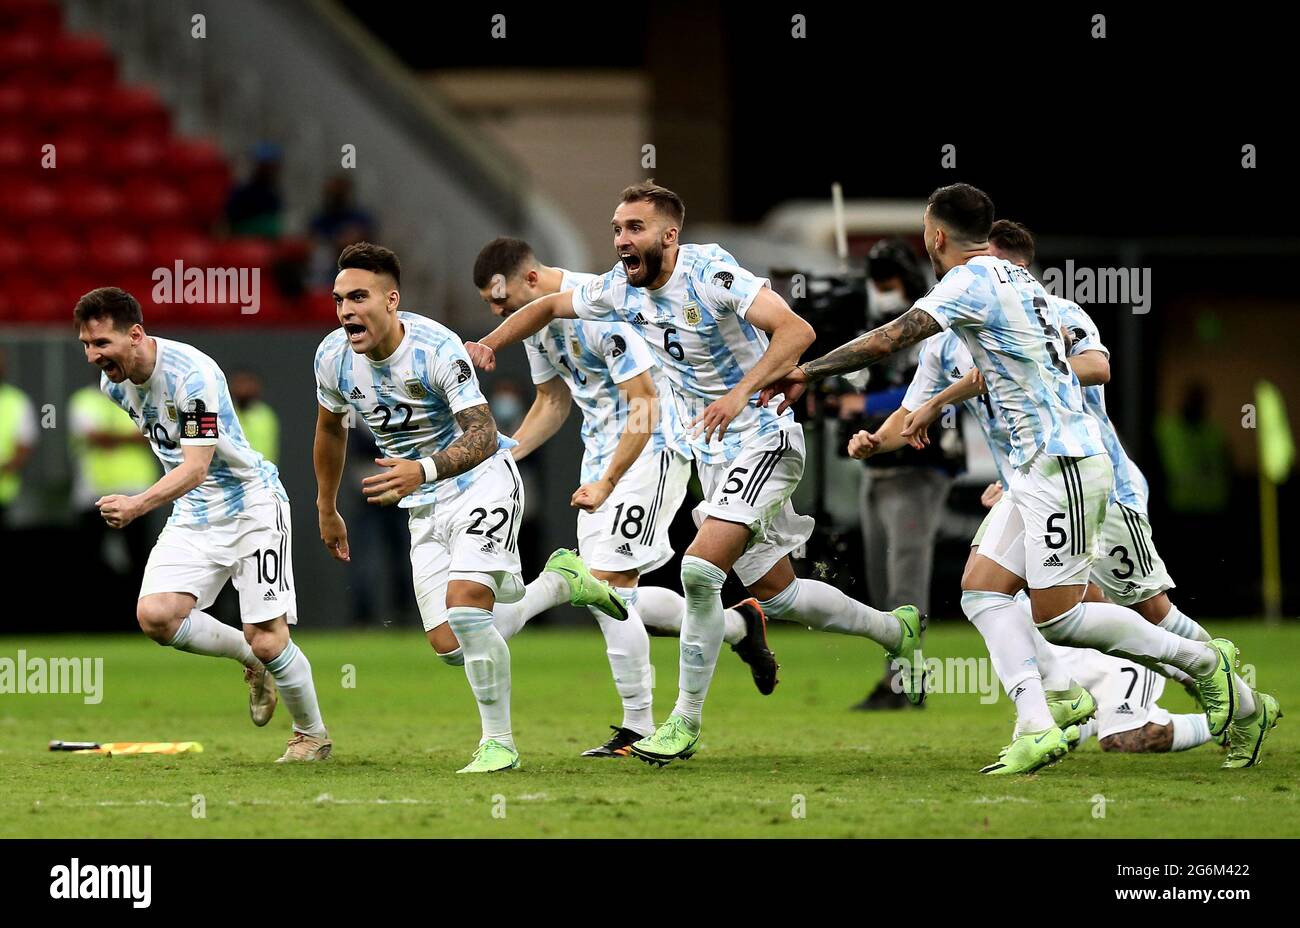 BRASILIA, BRAZIL - JULY 06: Lionel Messi ,Lautaro Martinez and Nicolas Otamendi of Argentina celebrate with teammates winning a Penalty Shootout ,after the Semifinal match between Argentina and Colombia as part of Conmebol Copa America Brazil 2021 at Mane Garrincha Stadium on July 6, 2021 in Brasilia, Brazil. (MB Media) Stock Photo